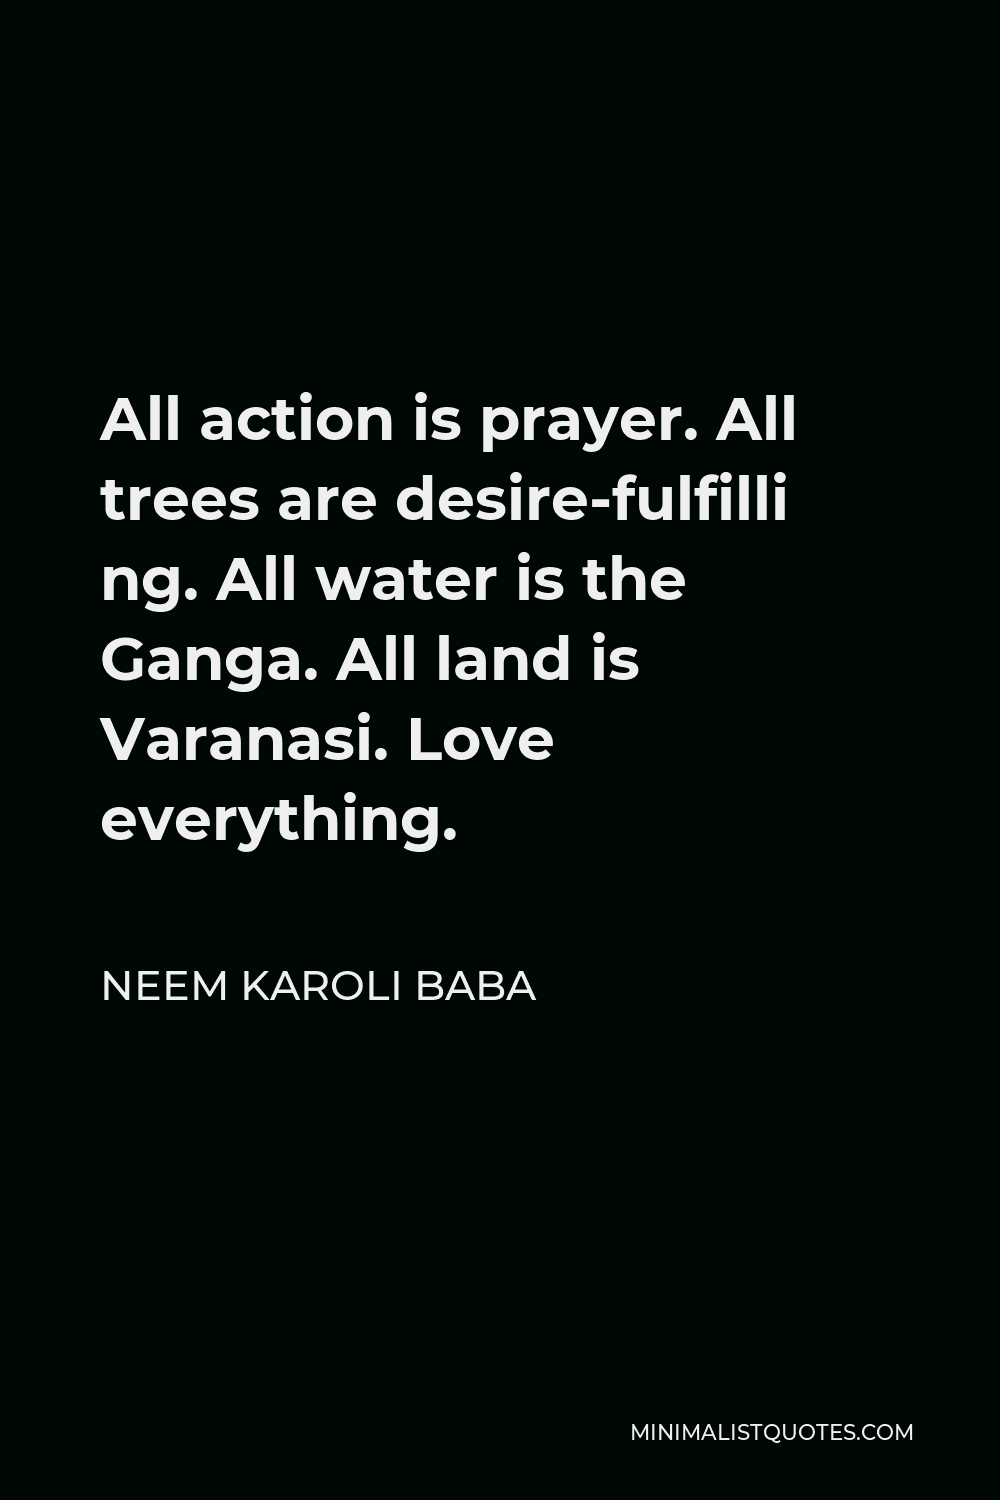 Neem Karoli Baba Quote - All action is prayer. All trees are desire-fulfilli ng. All water is the Ganga. All land is Varanasi. Love everything.